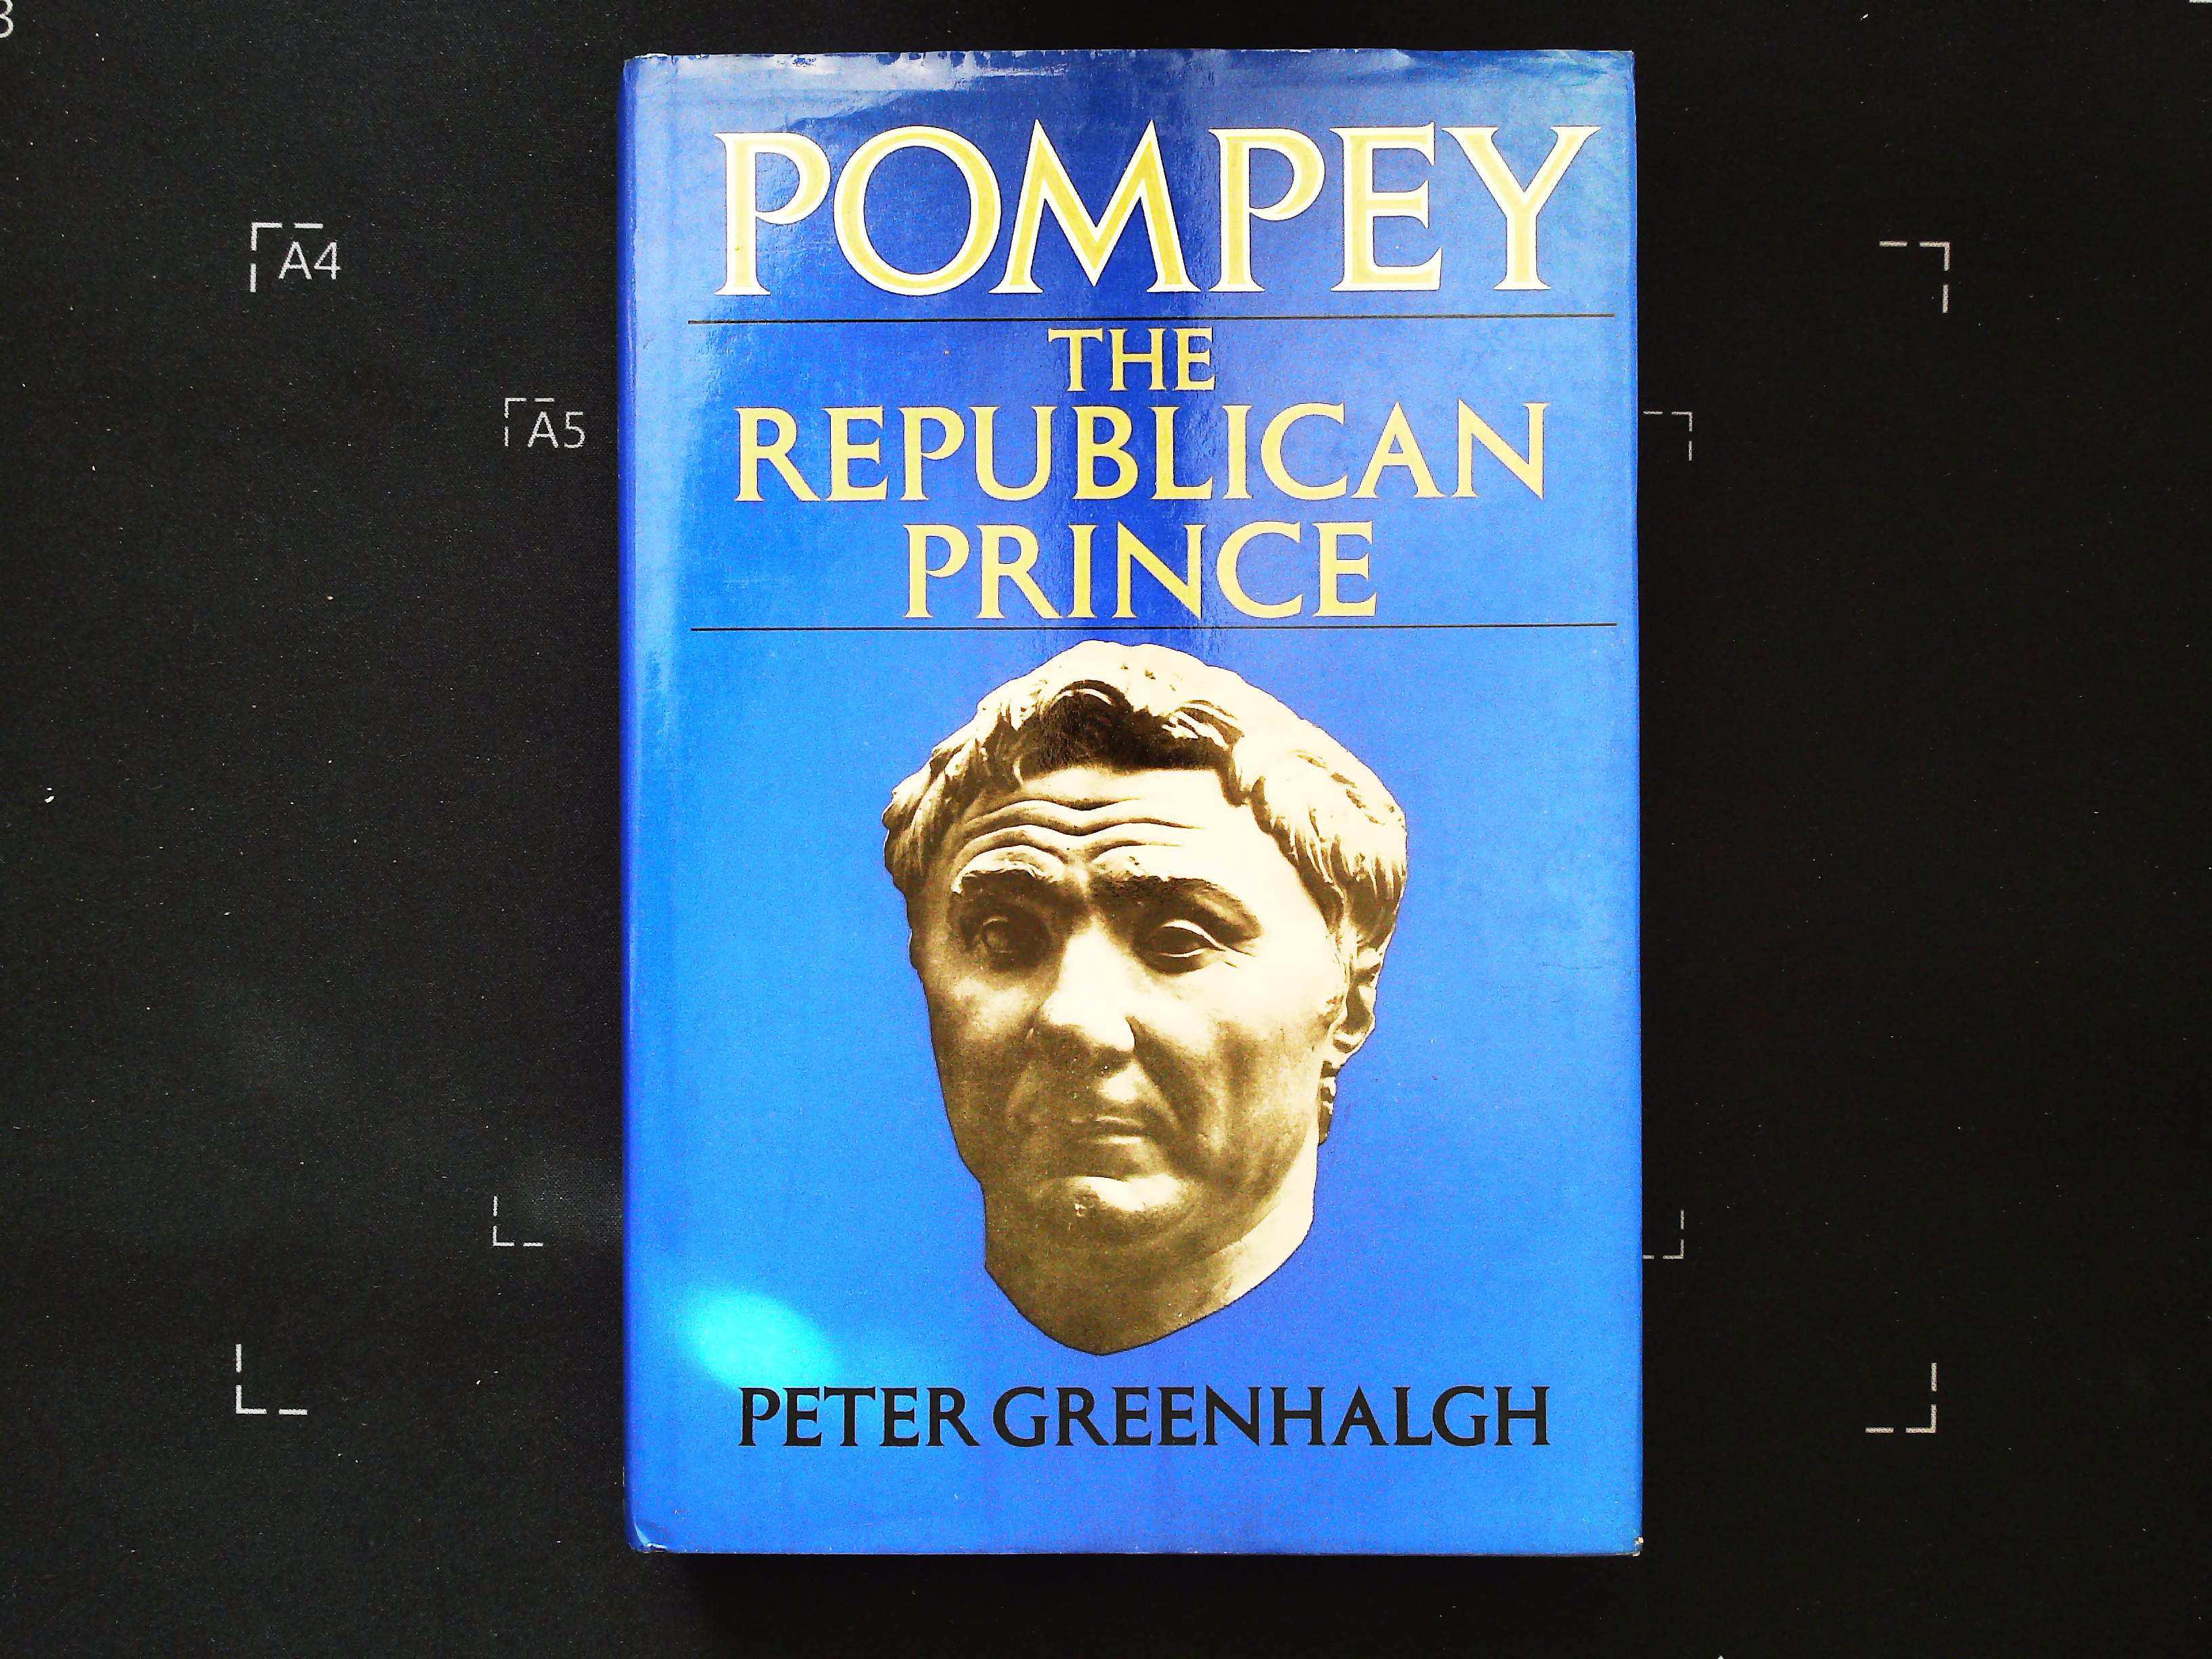 Pompey The Republican Prince by Peter Greenhalgh hardback book 320 pages Published 1981 Weidenfeld